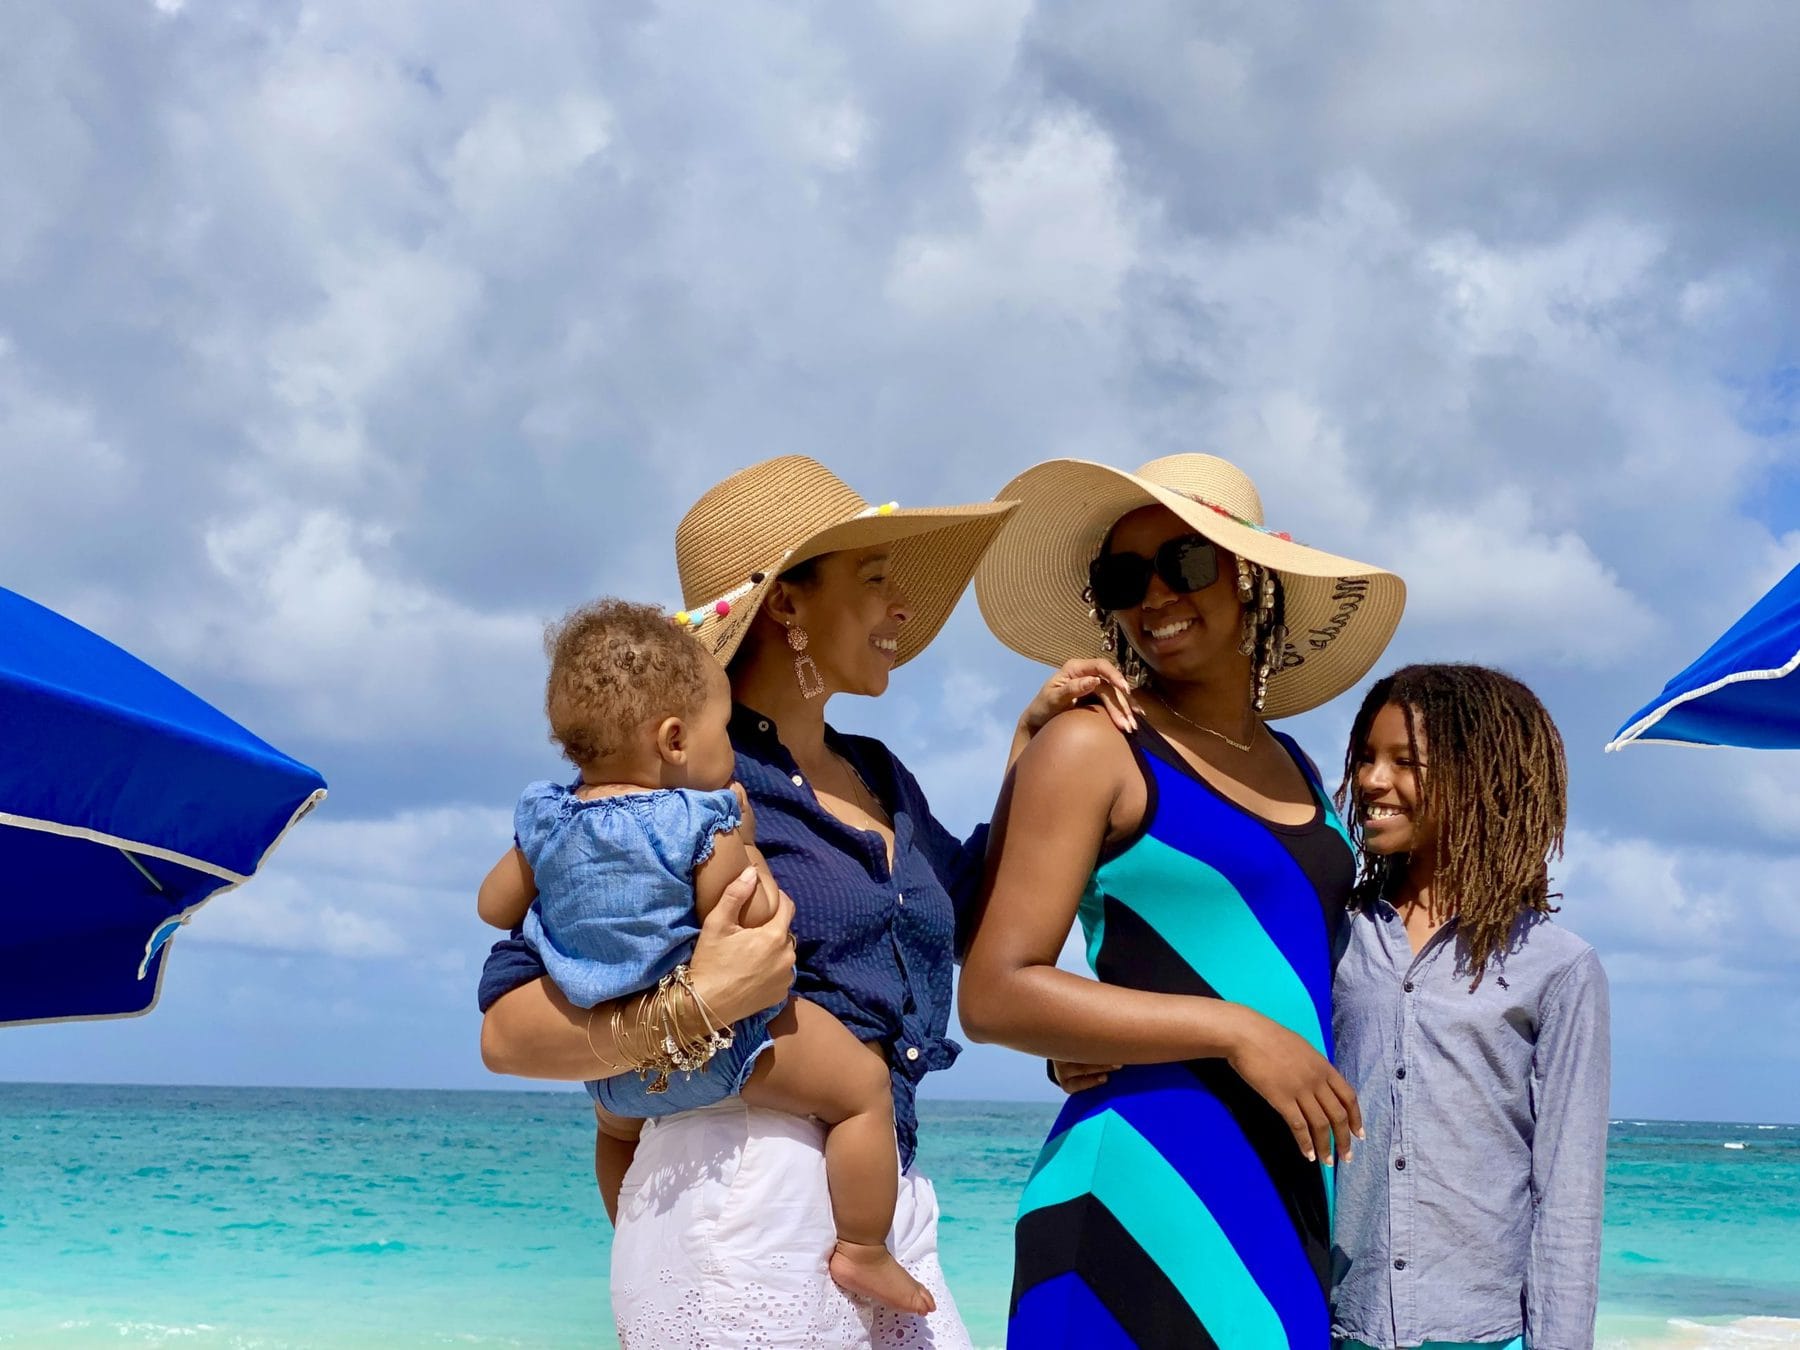 Vanessa Explains the Top 5 Beaches to Visit with Kids in Anguilla